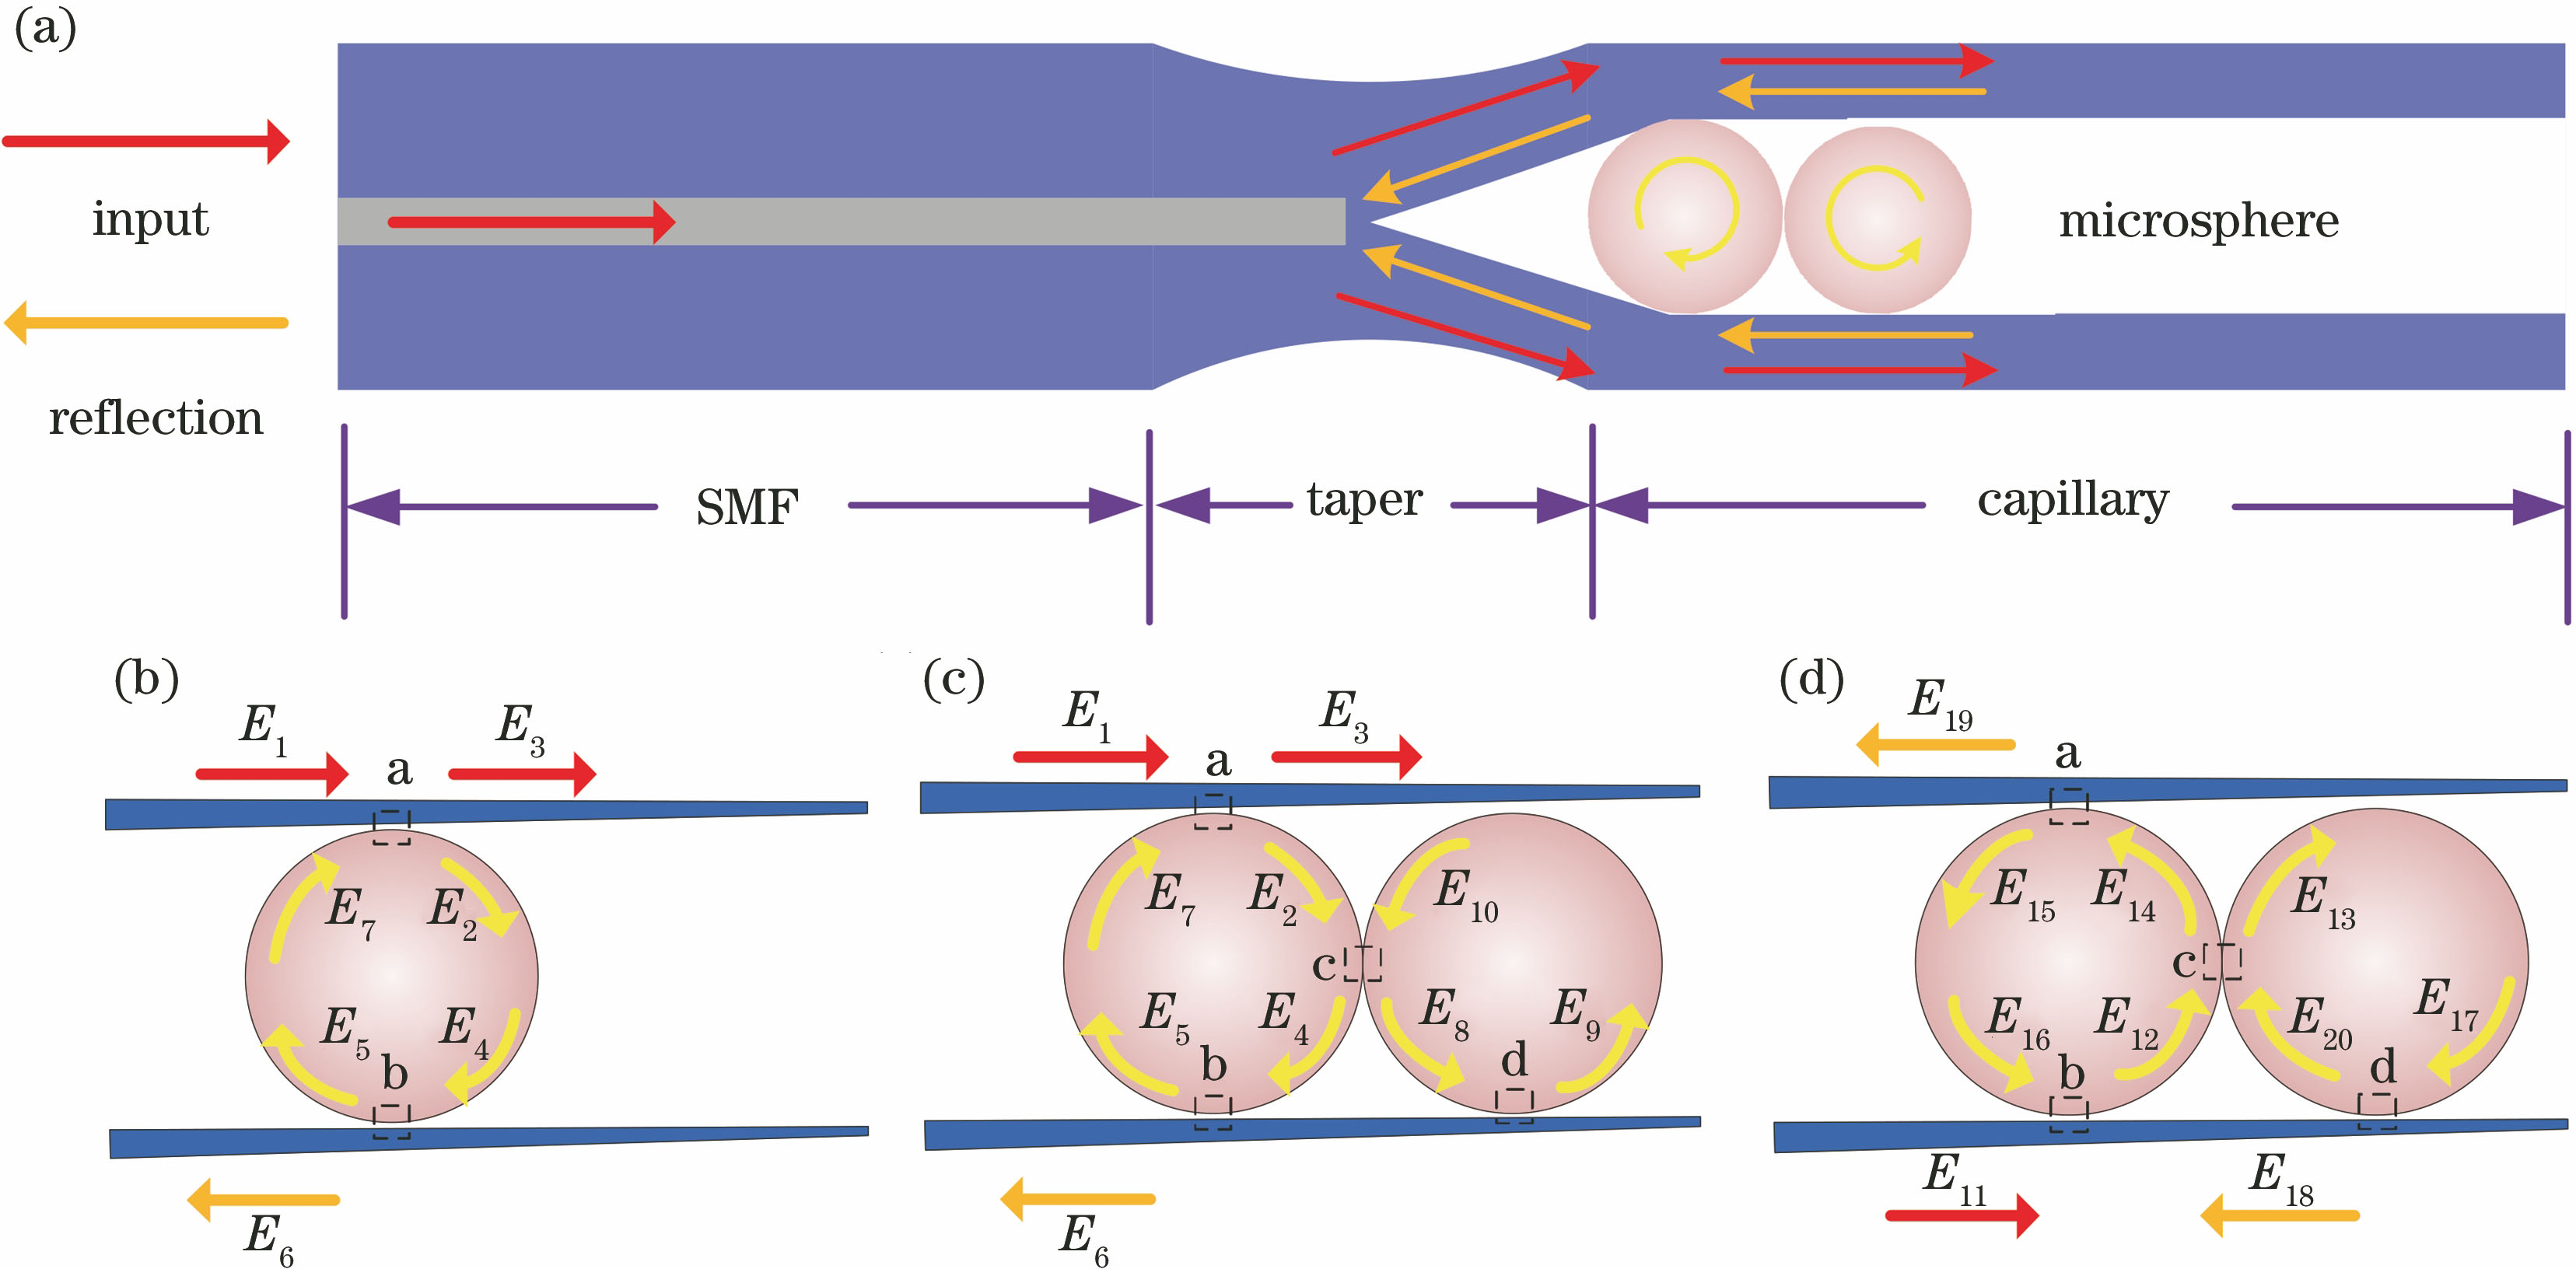 Schematic of fiber coupled double microsphere resonators, and diagrams of light propagation in microsphere resonators. (a) Schematic of fiber coupled double microsphere resonator; (b) light propagation in single microsphere resonator; (c) upper light propagation in double microsphere resonators; (d) lower light propagation in double microsphere resonators